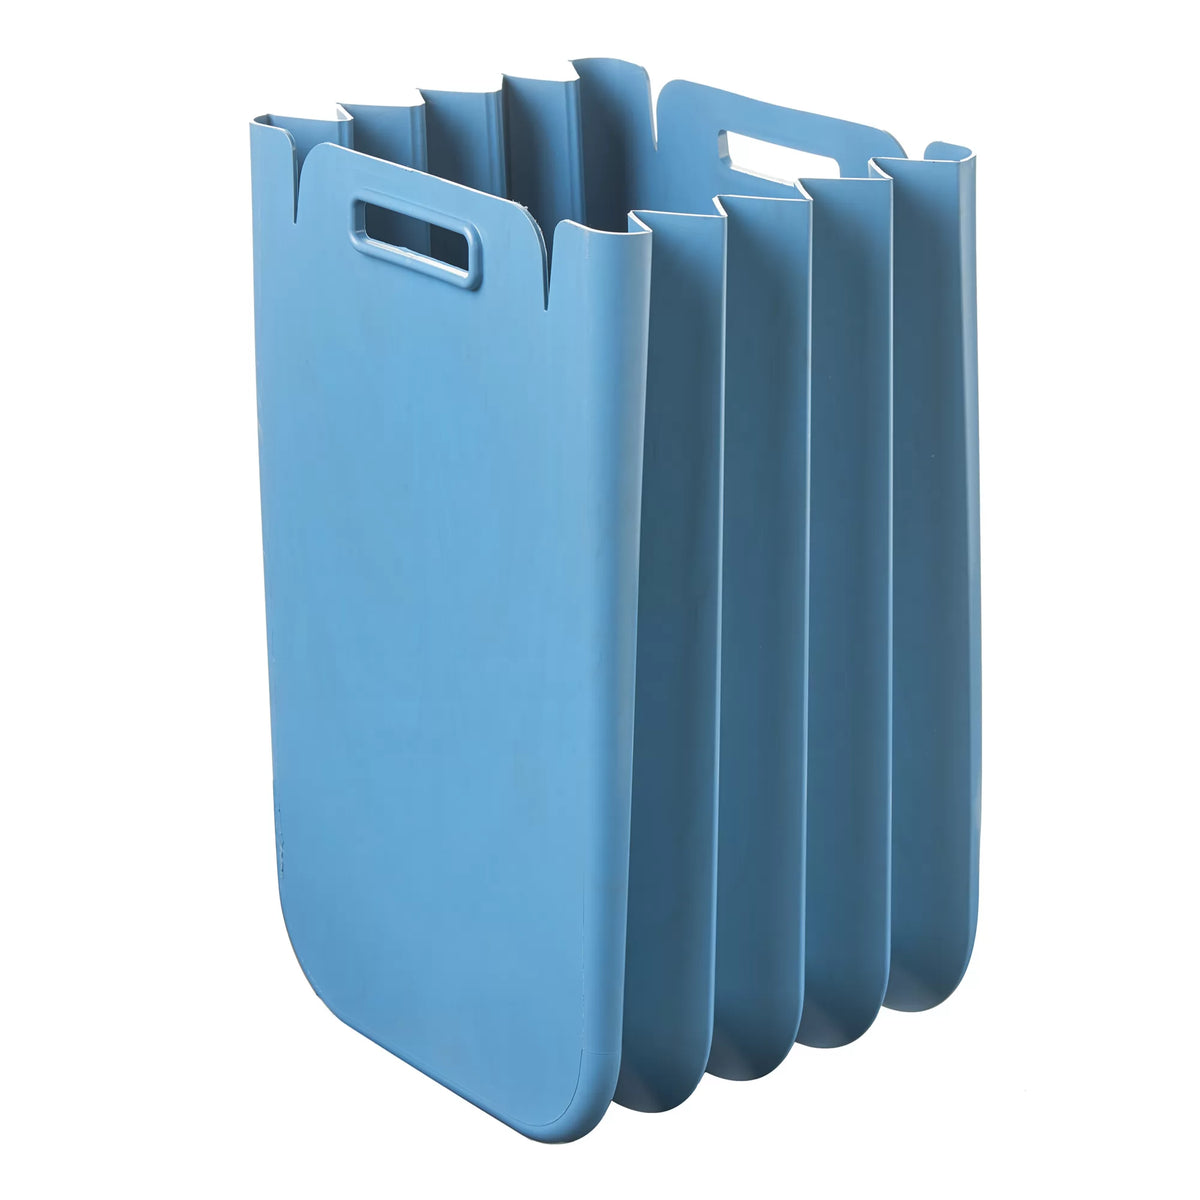 Eco Packly Multipurpose Recycling Bin in Blue - 25L - Notbrand